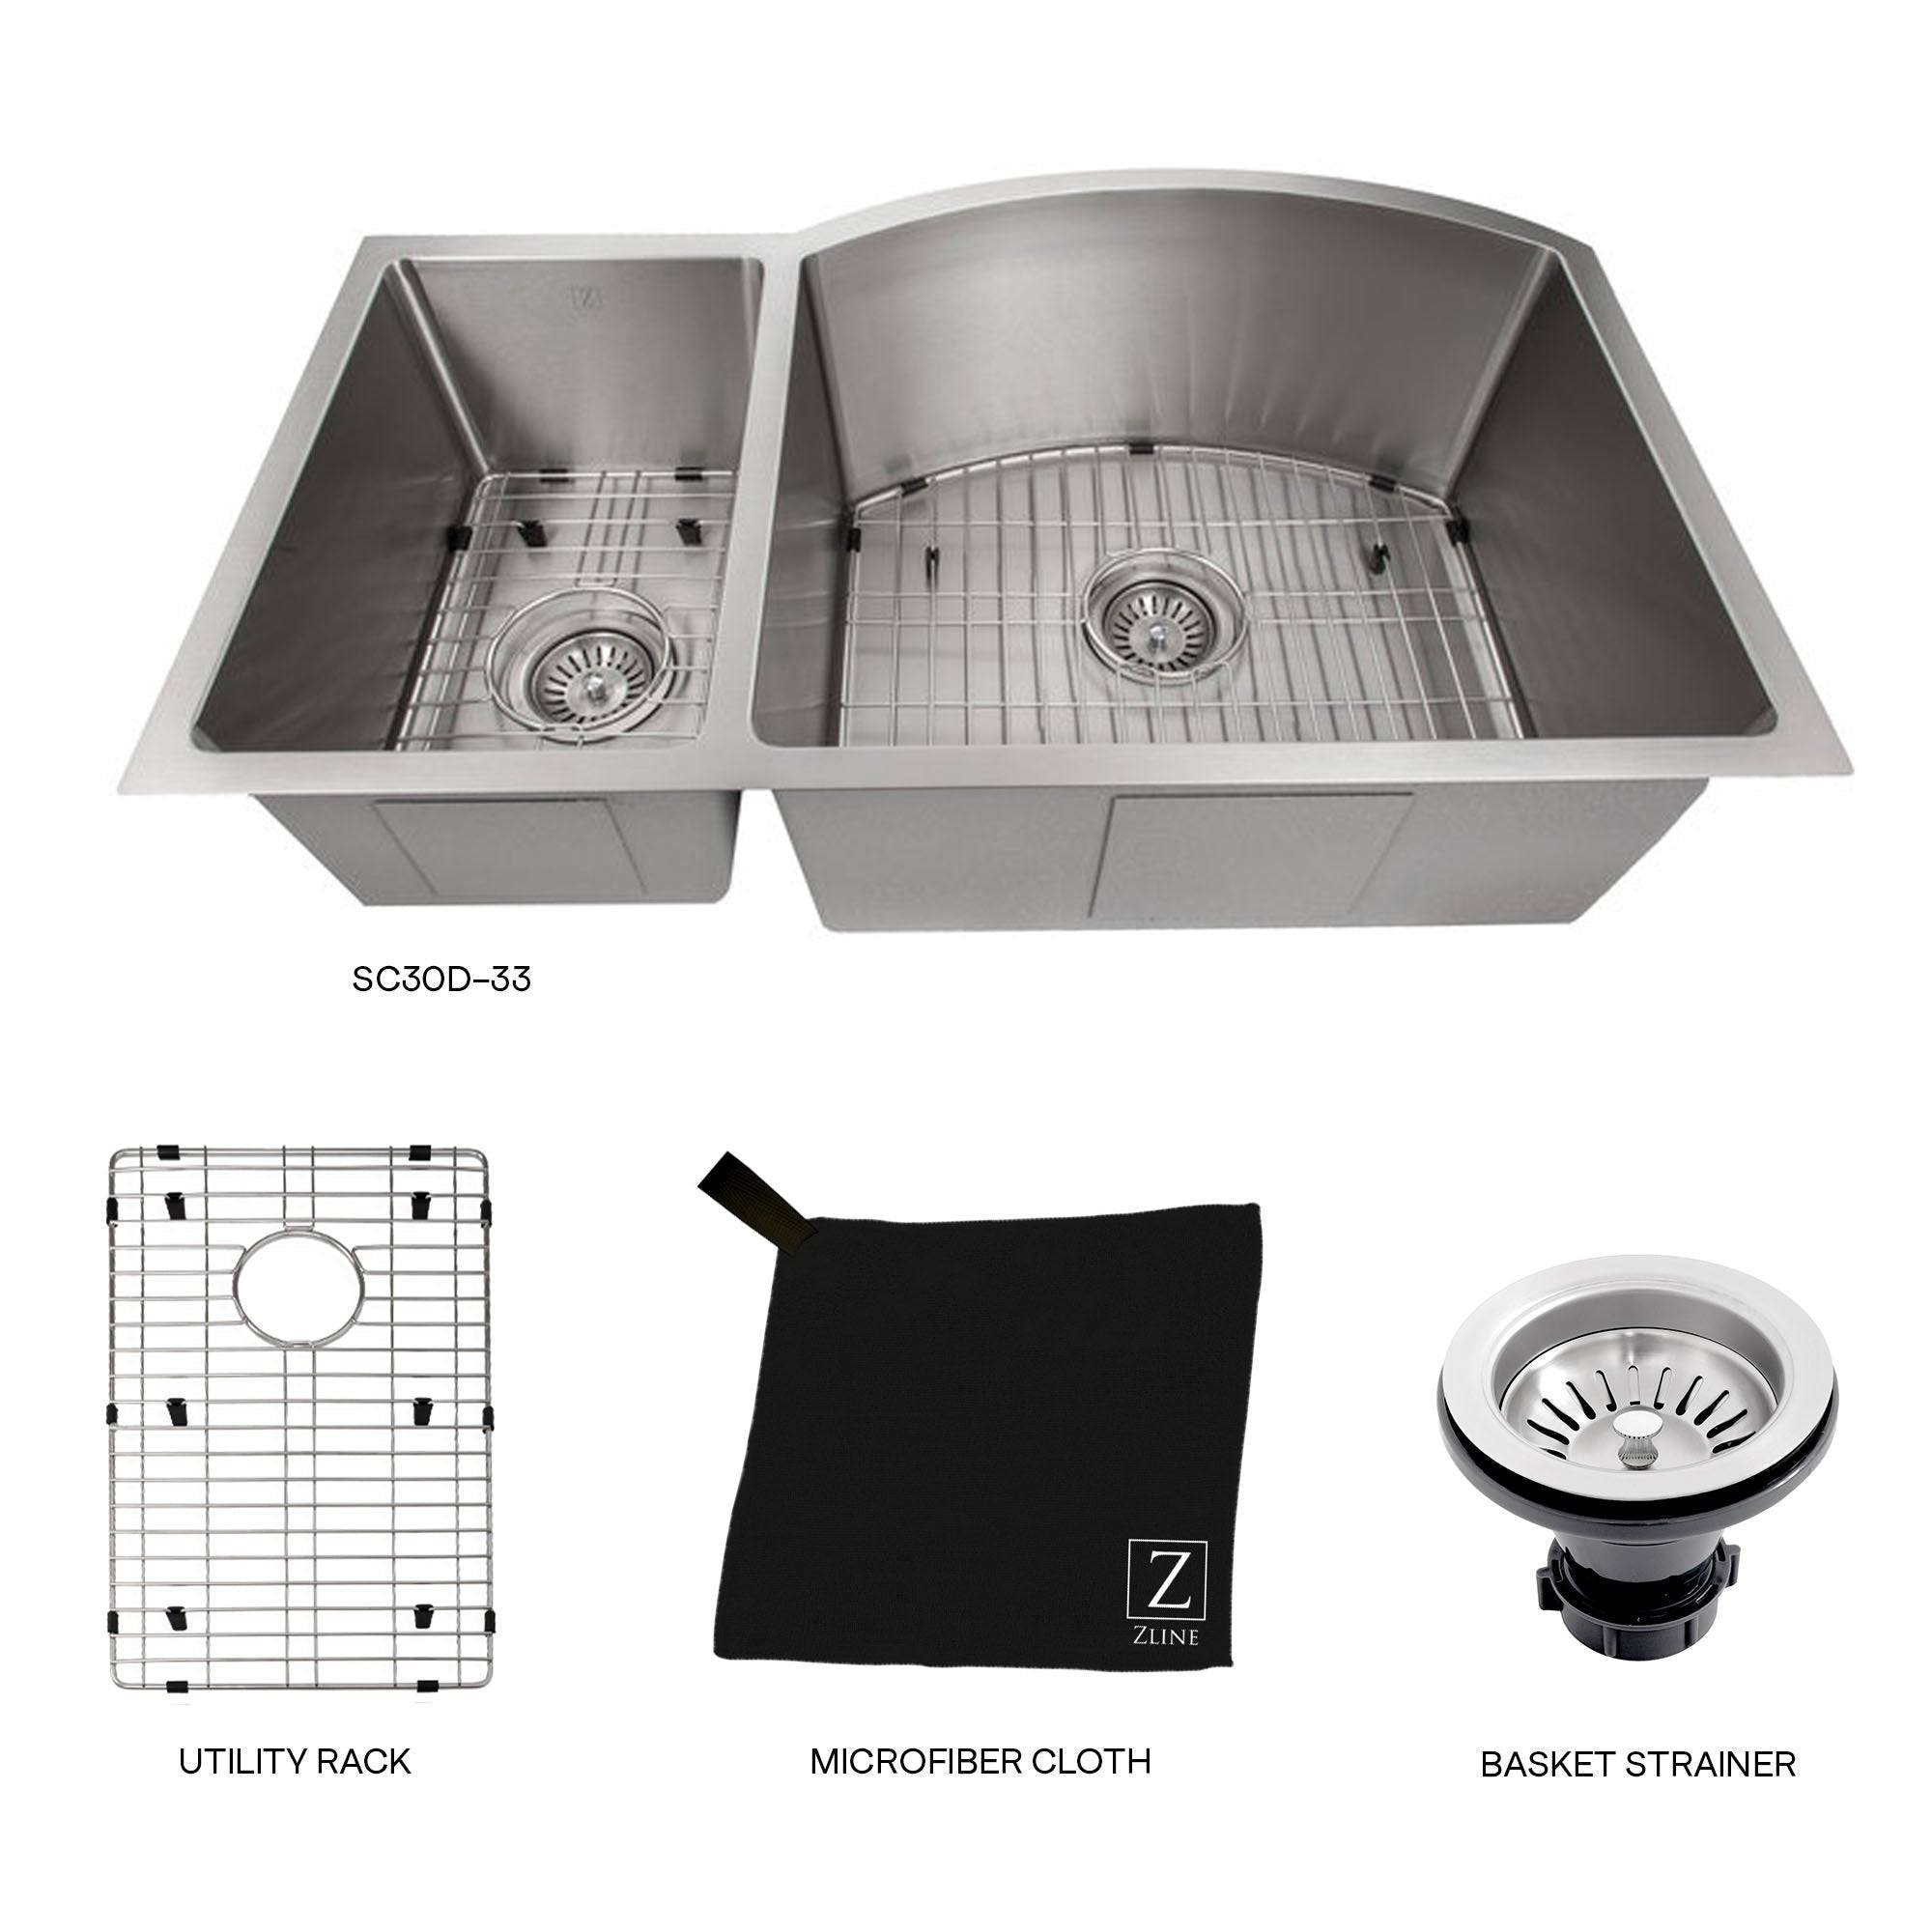 ZLINE 33 in. Aspen Undermount Double Bowl Kitchen Sink with Bottom Grid (SC30D) and included accessories - utility rack, microfiber cloth, and basket strainer